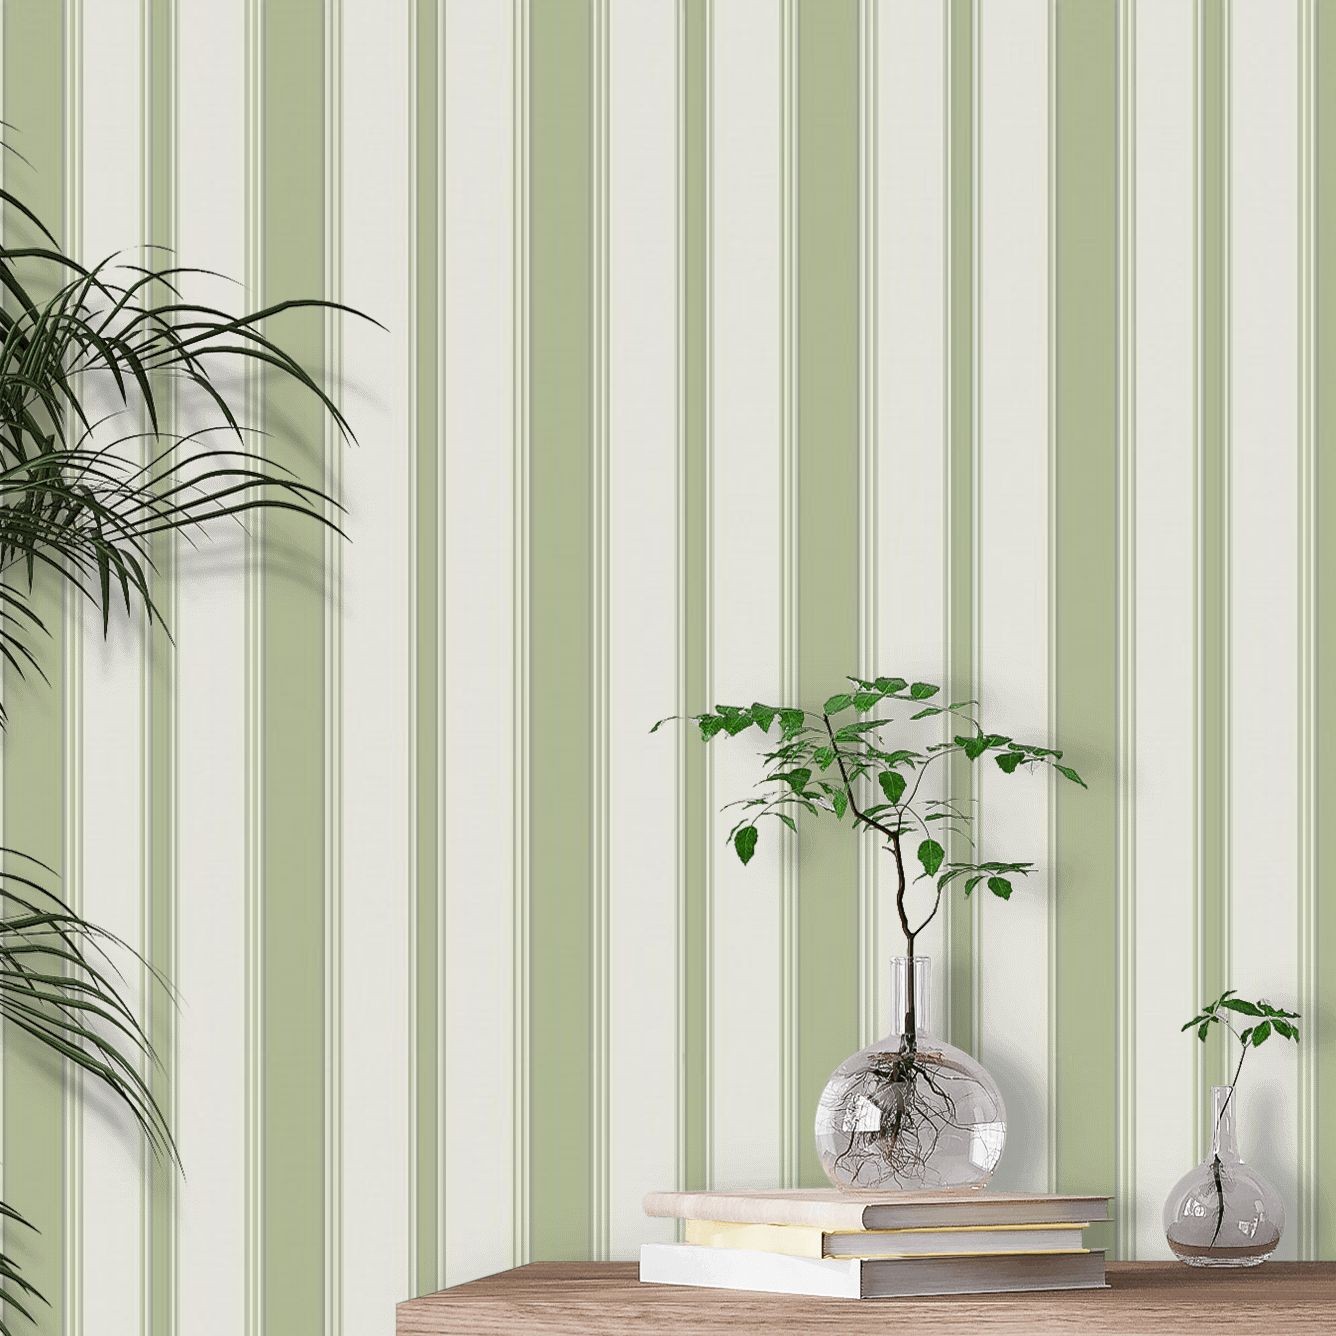 lime green and grey wallpaper - Google Search | Green striped wallpaper, Striped  wallpaper, Striped room